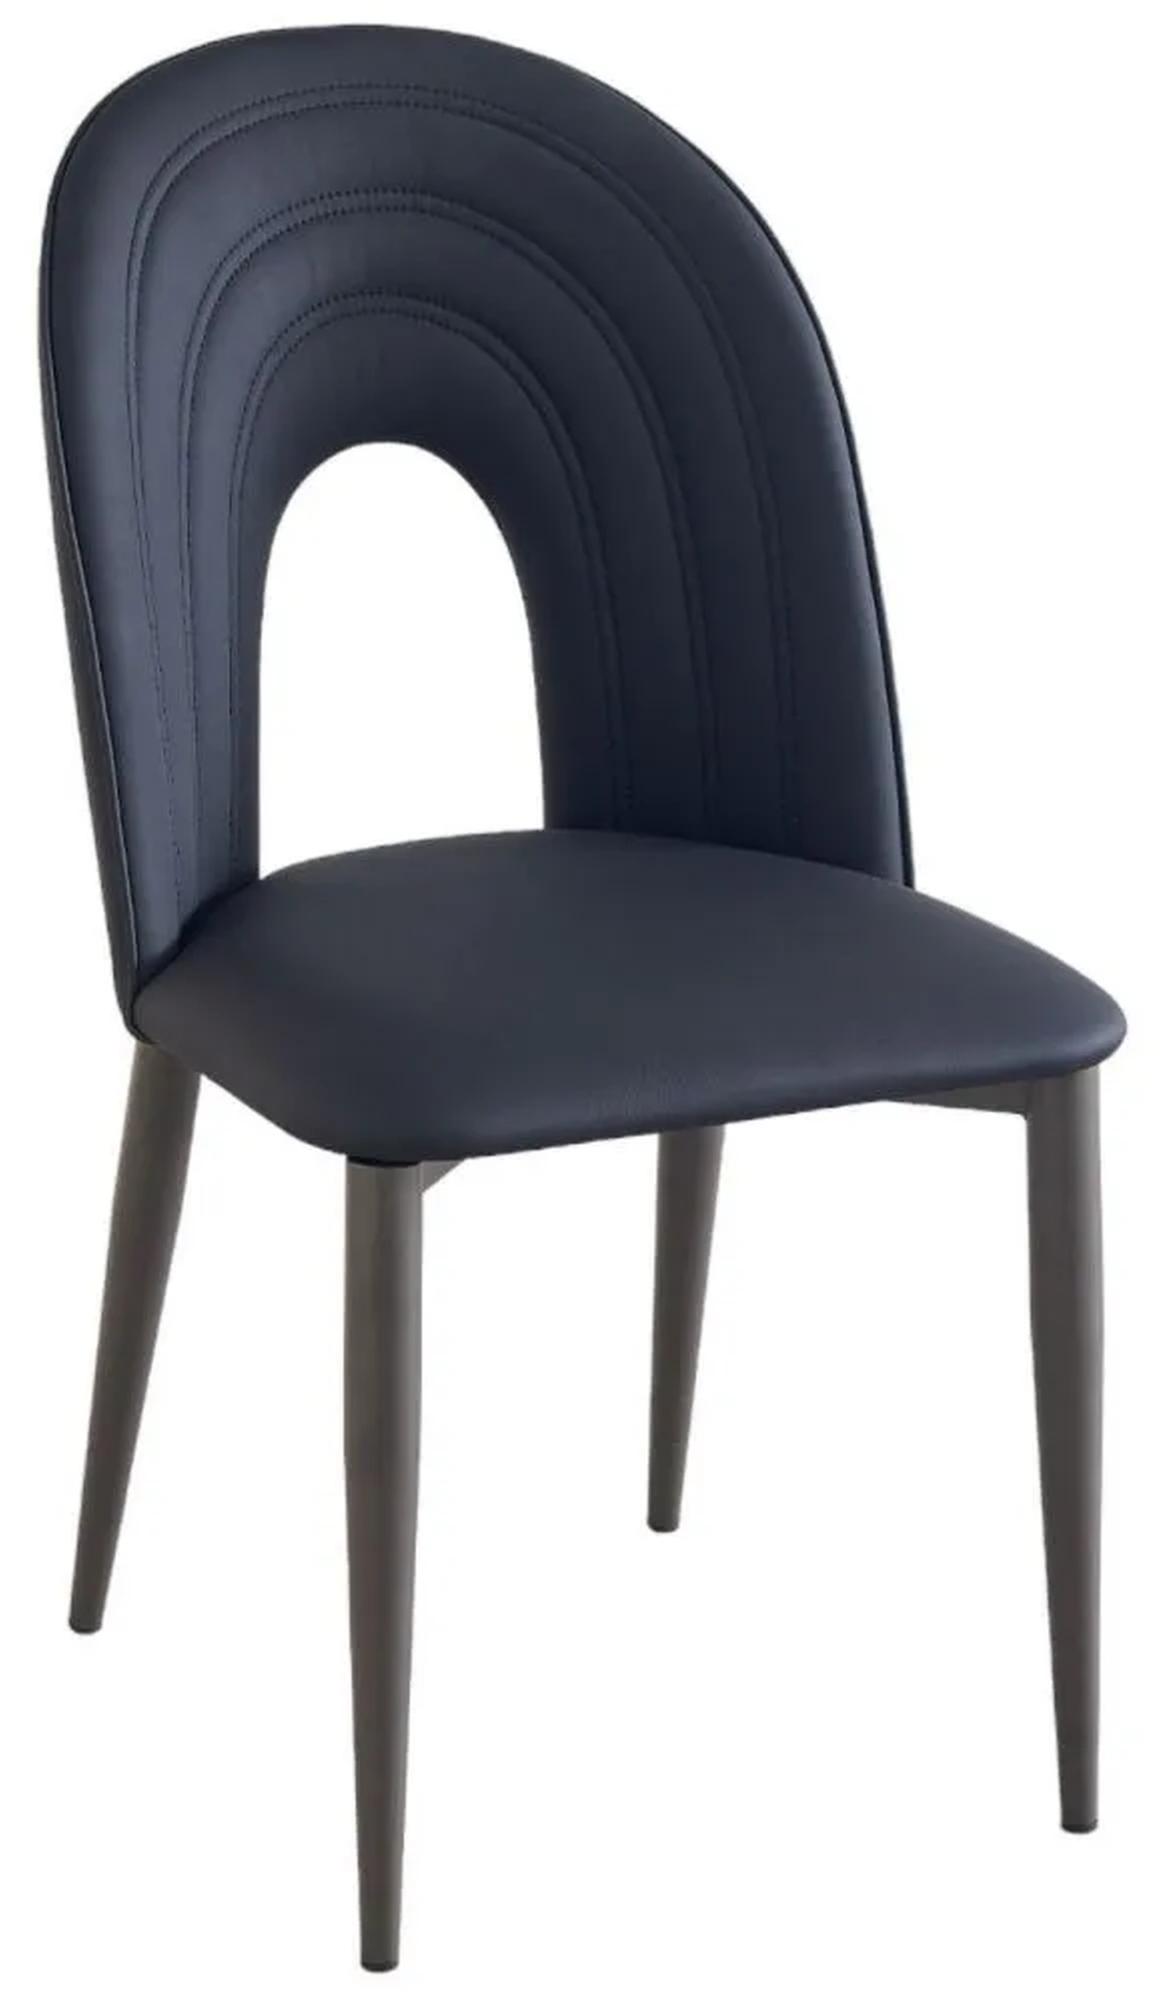 Echo Black Faux Leather High Back Dining Chair with Black Legs